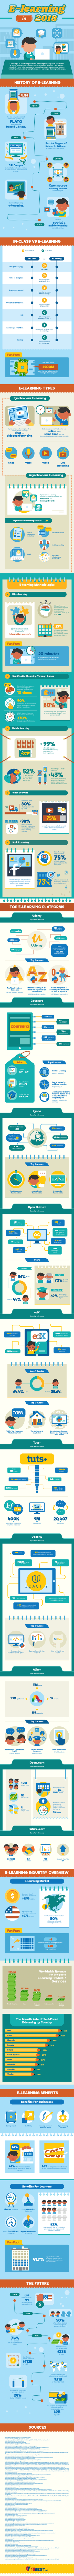 elearning infographic